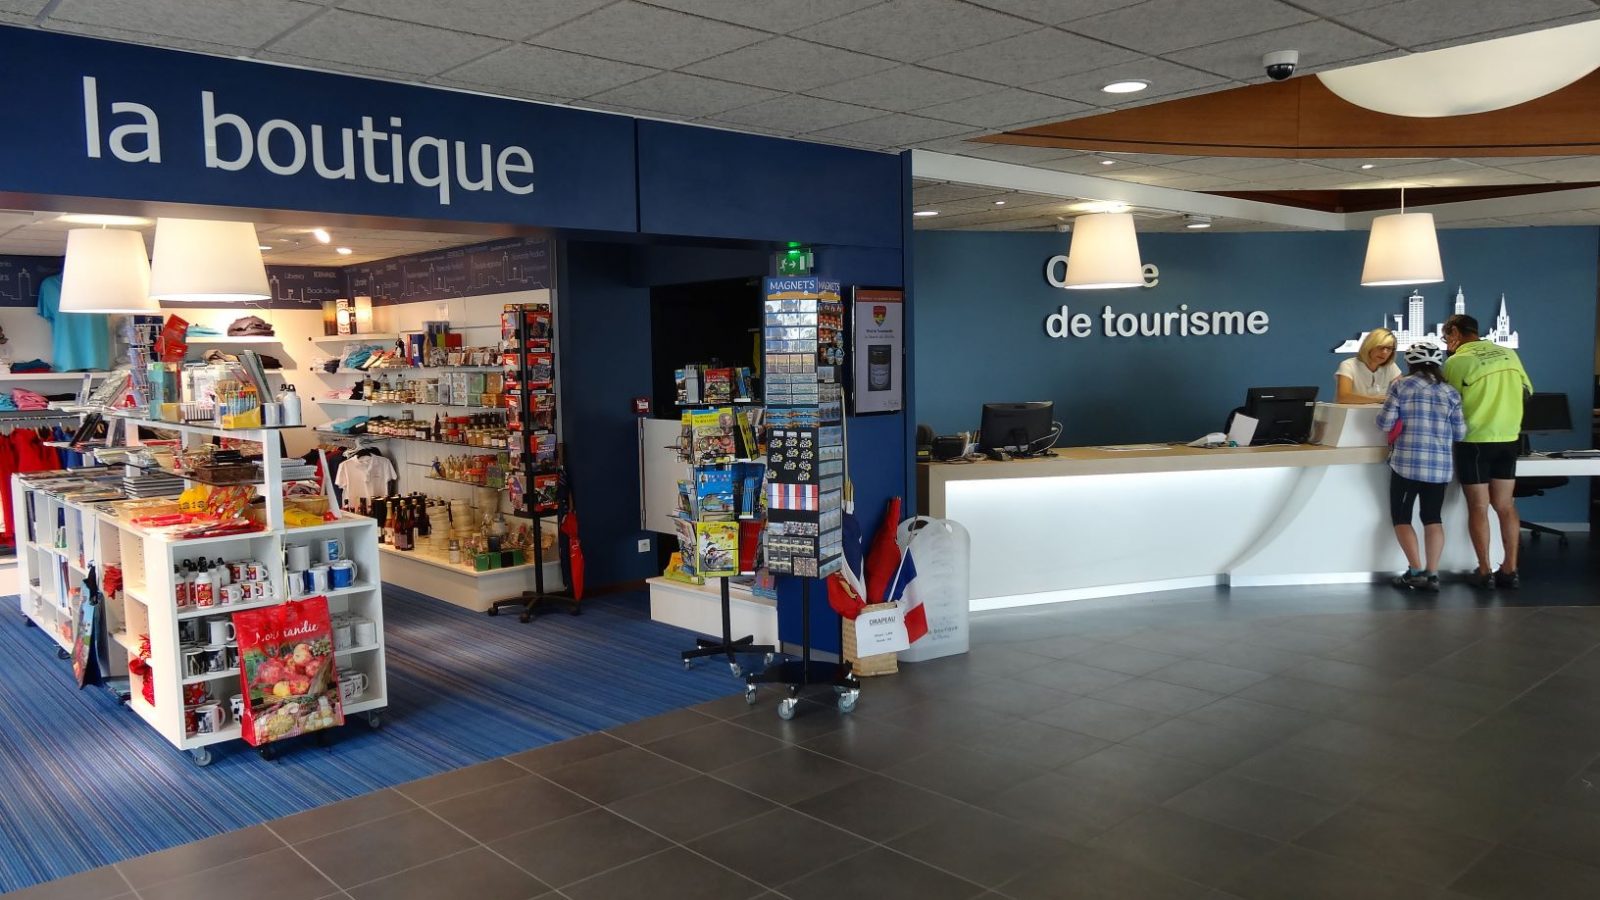 normandy tourist office